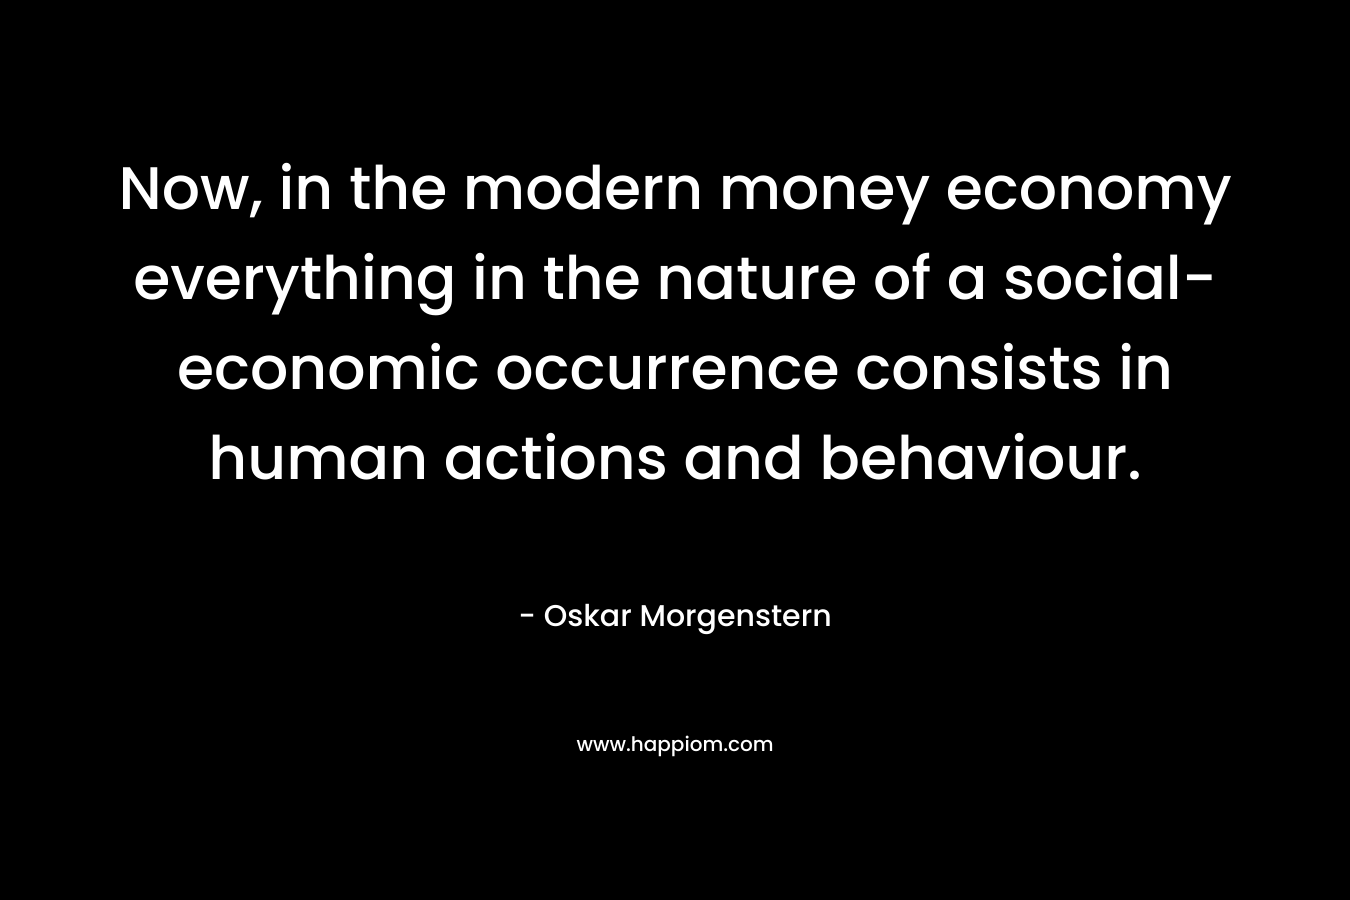 Now, in the modern money economy everything in the nature of a social-economic occurrence consists in human actions and behaviour.